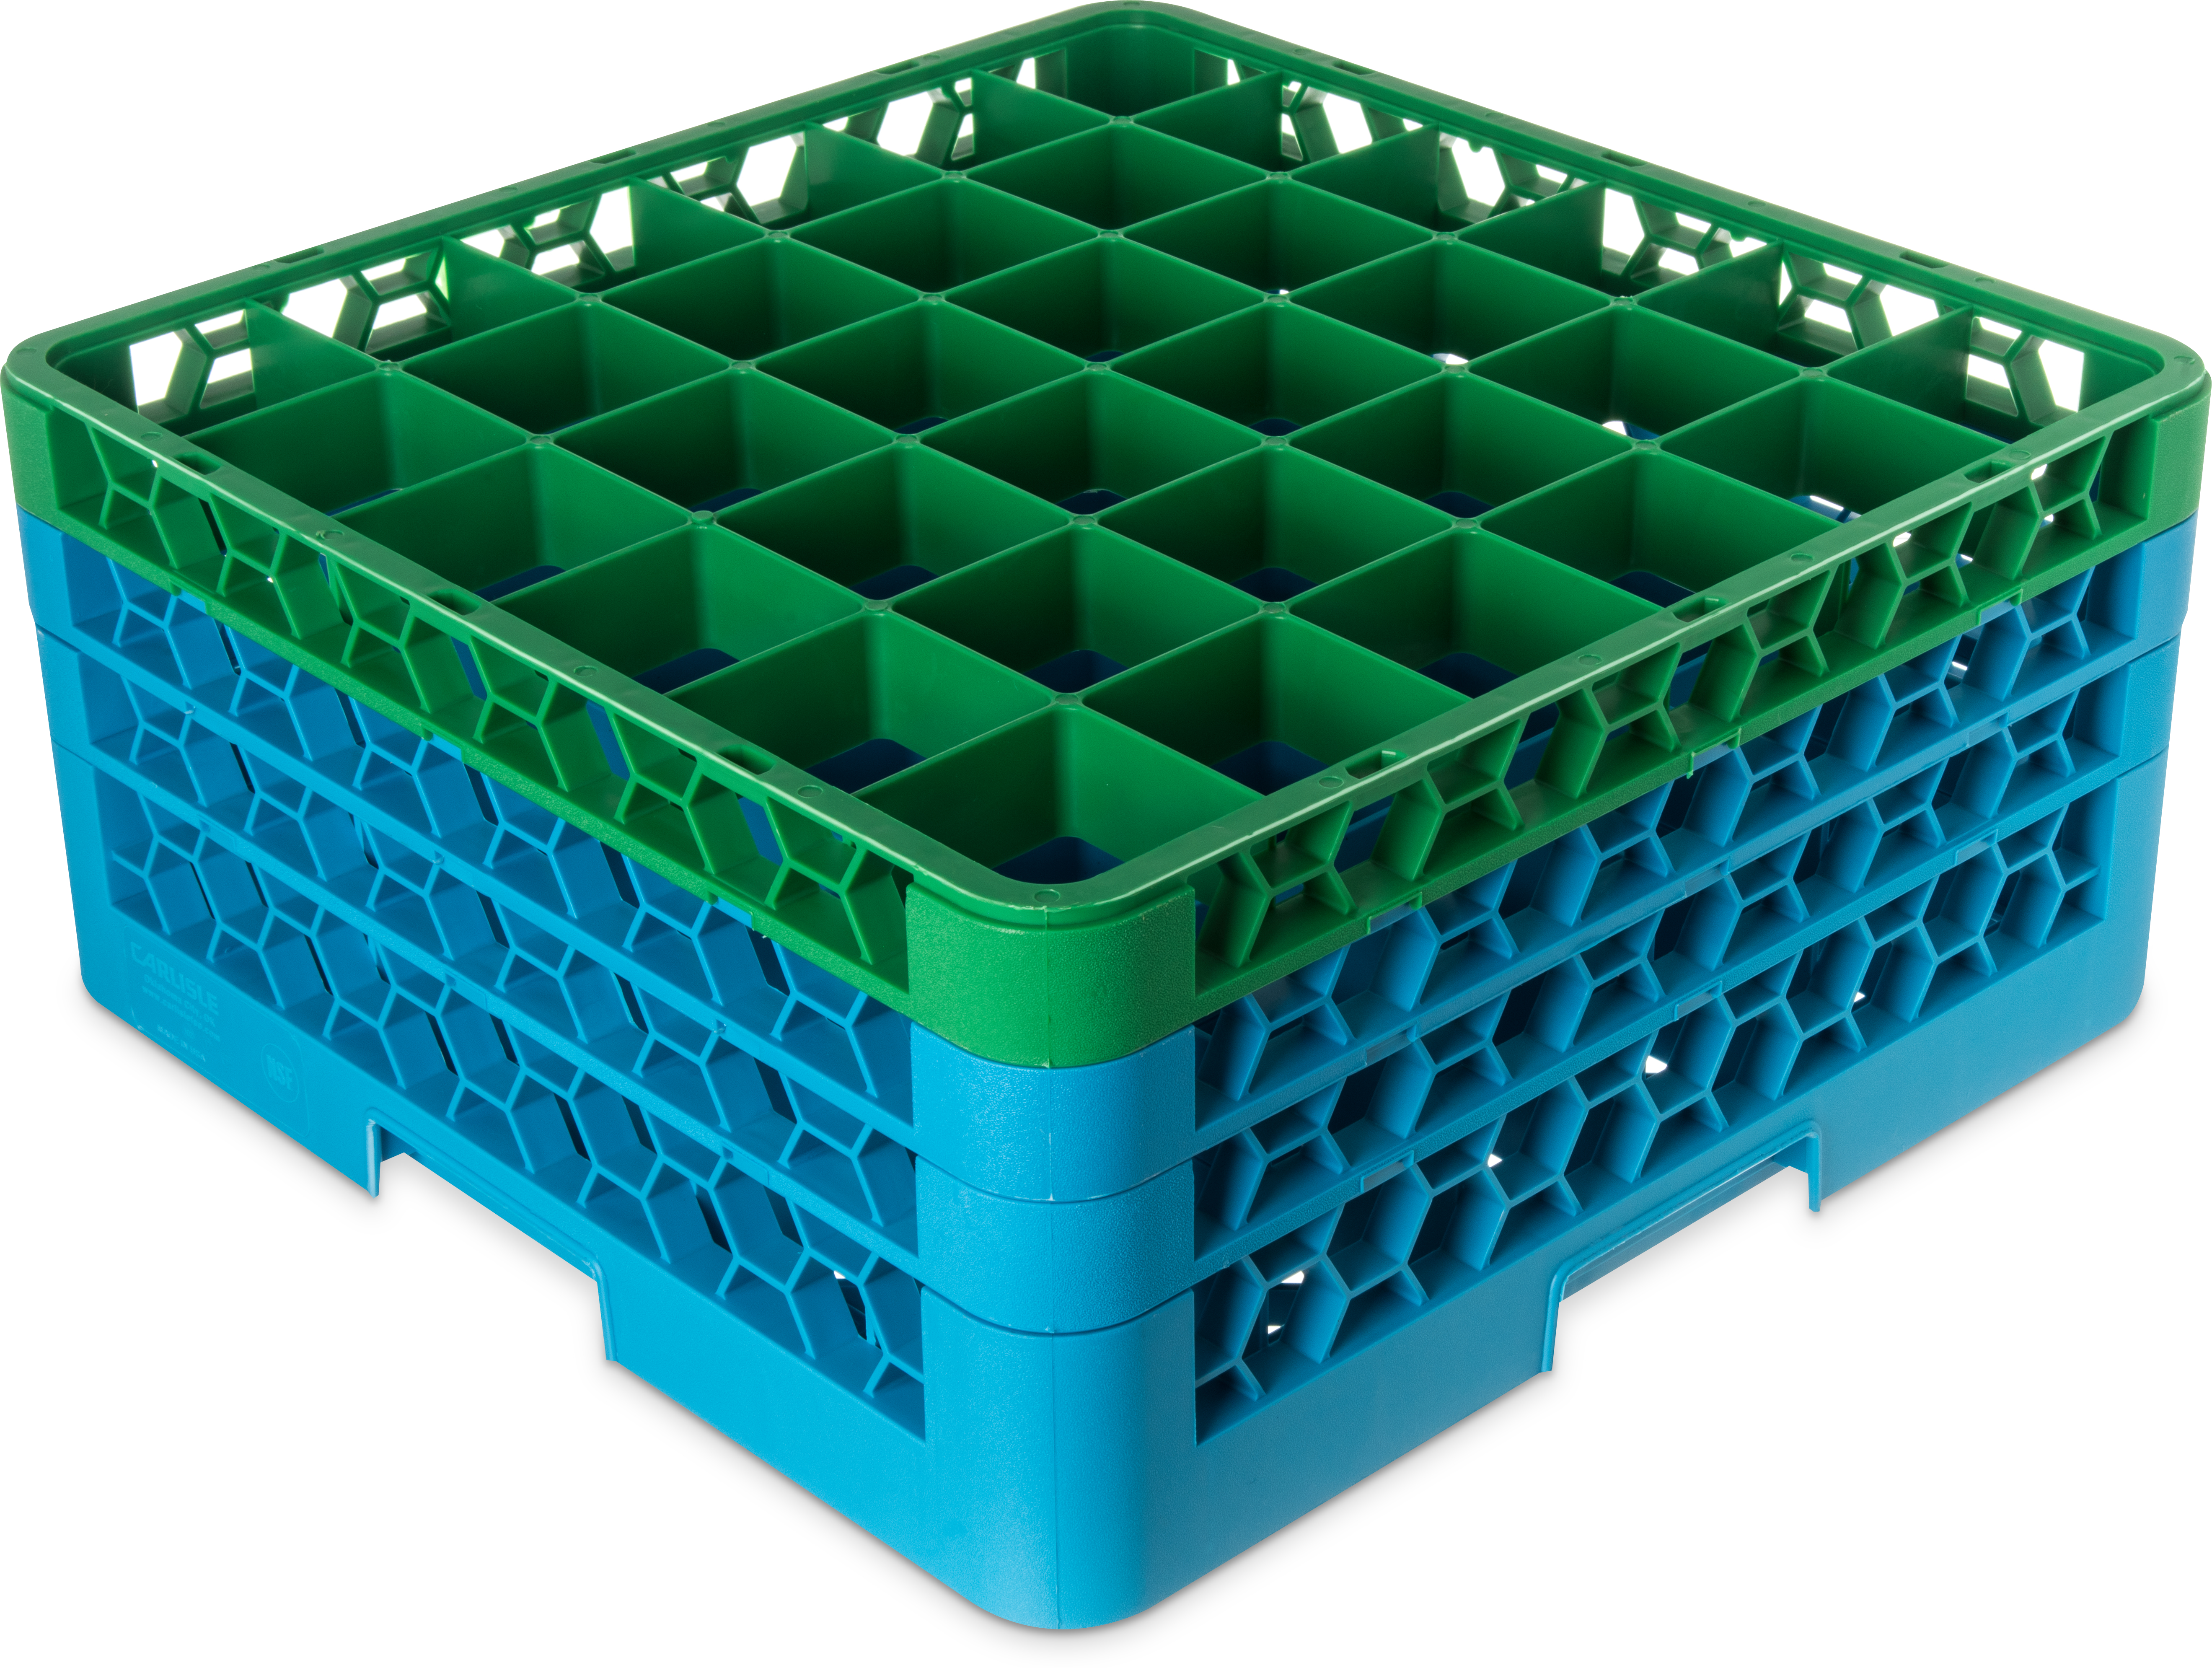 OptiClean 36 Compartment Glass Rack with 3 Extenders 8.72 - Green-Carlisle Blue